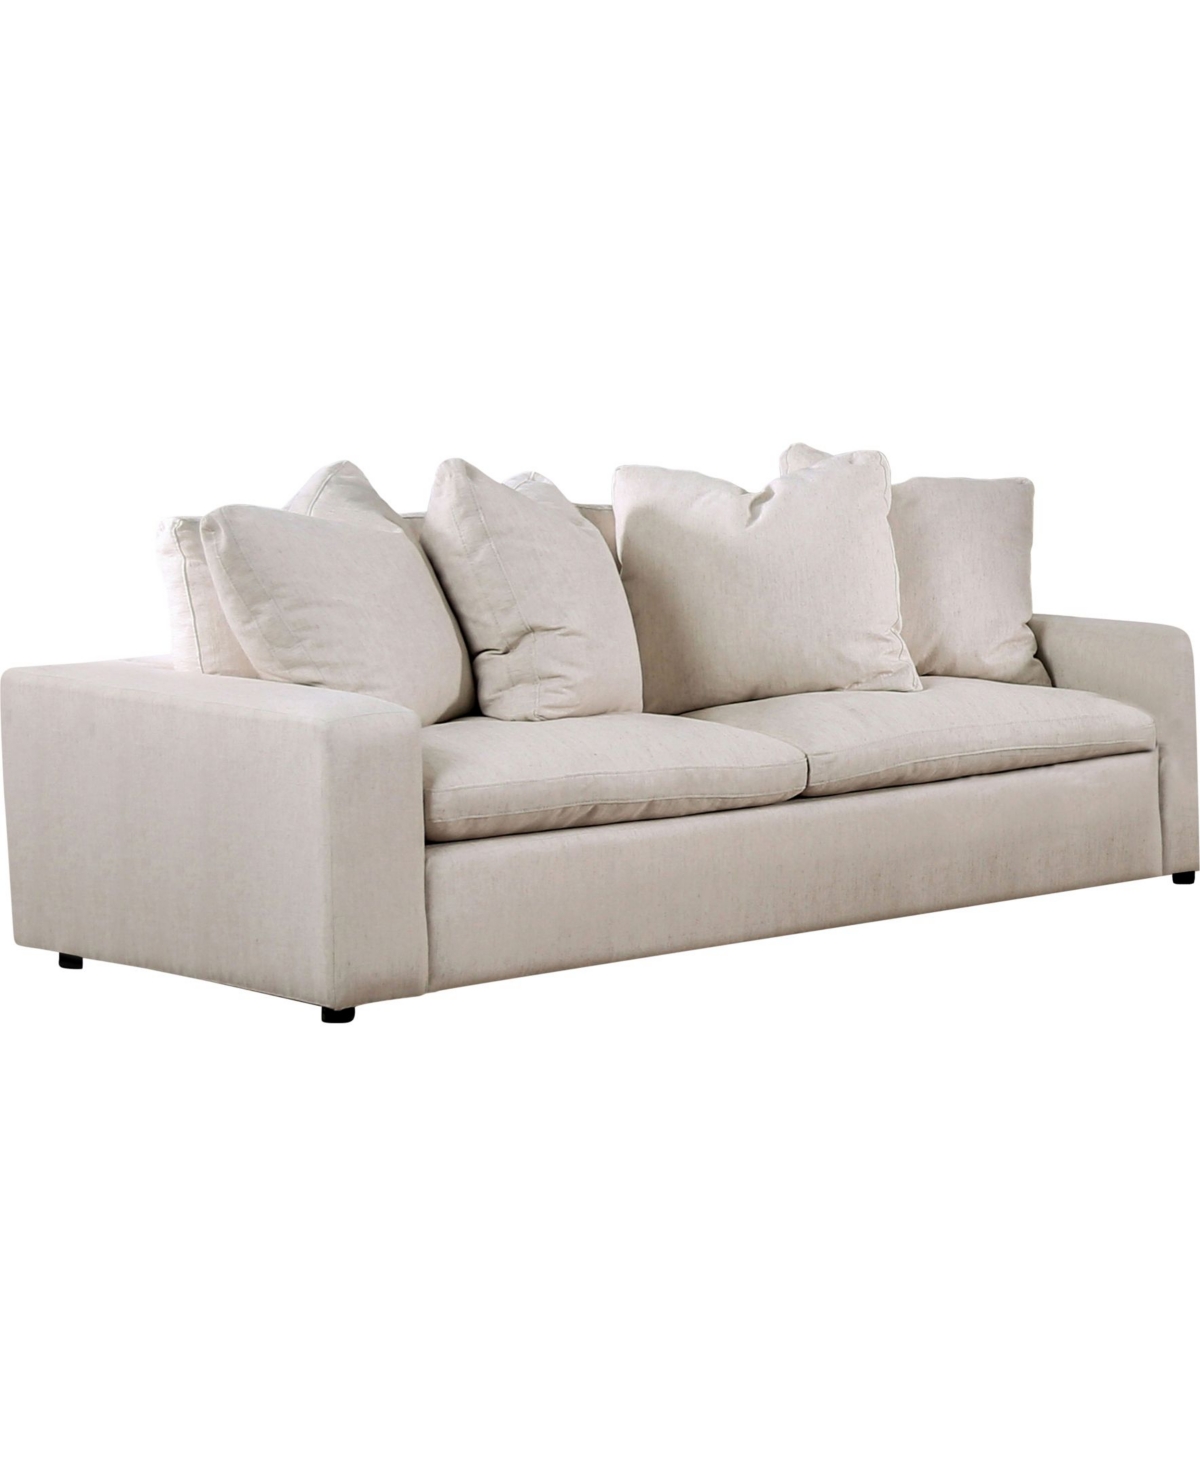 of America Fenny Upholstered Love Seat